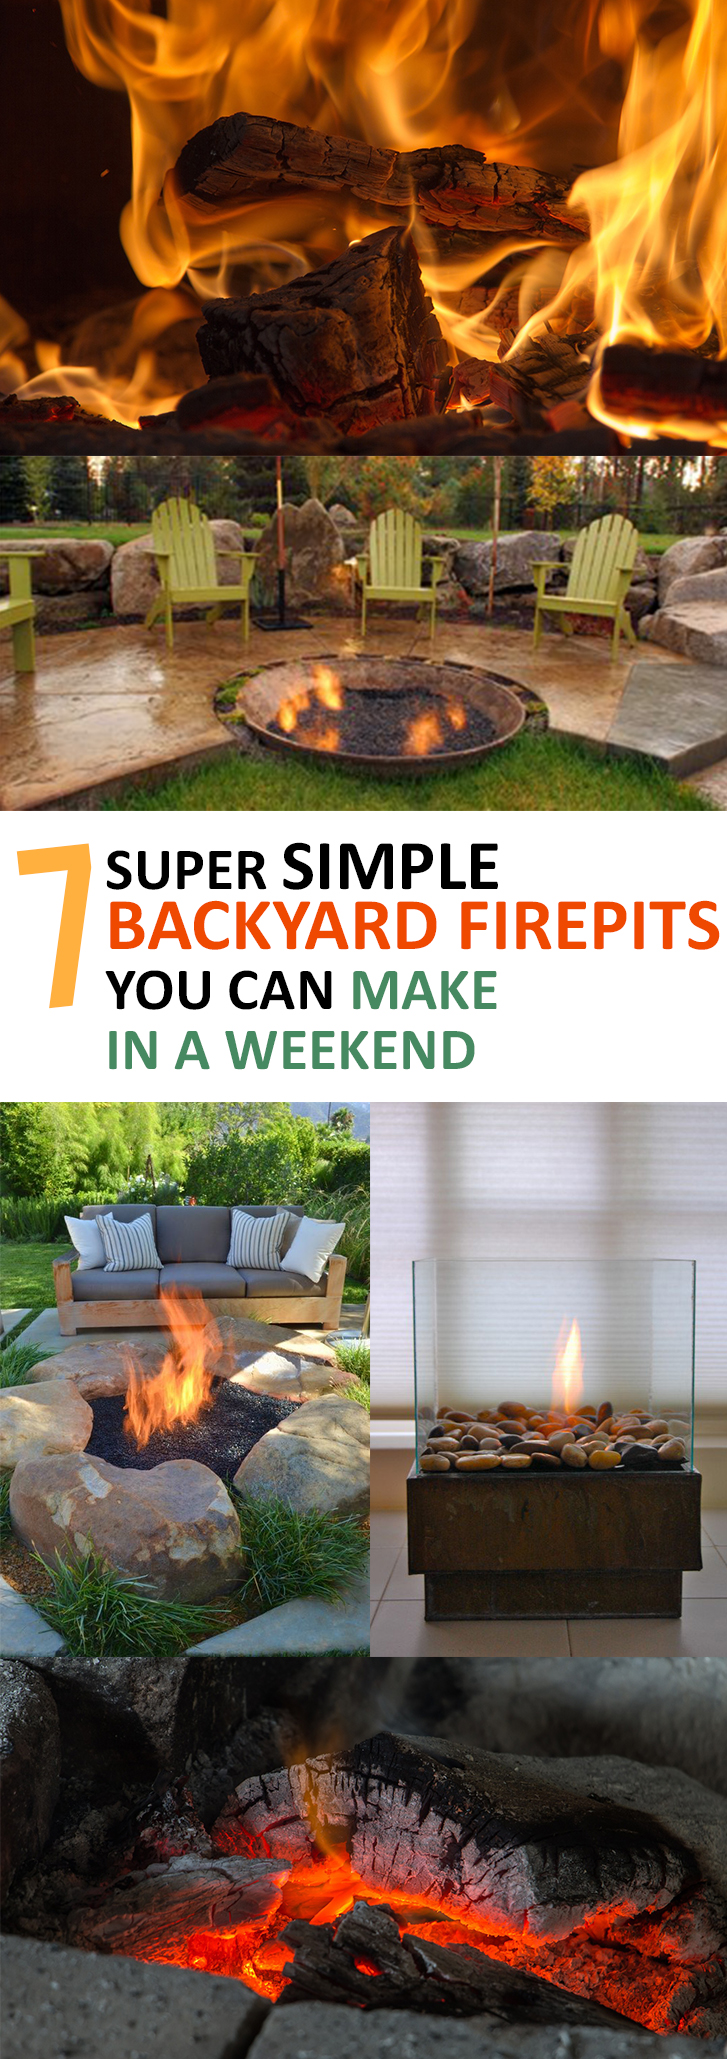 7 Super Simple Backyard Firepits You Can Make in a Weekend